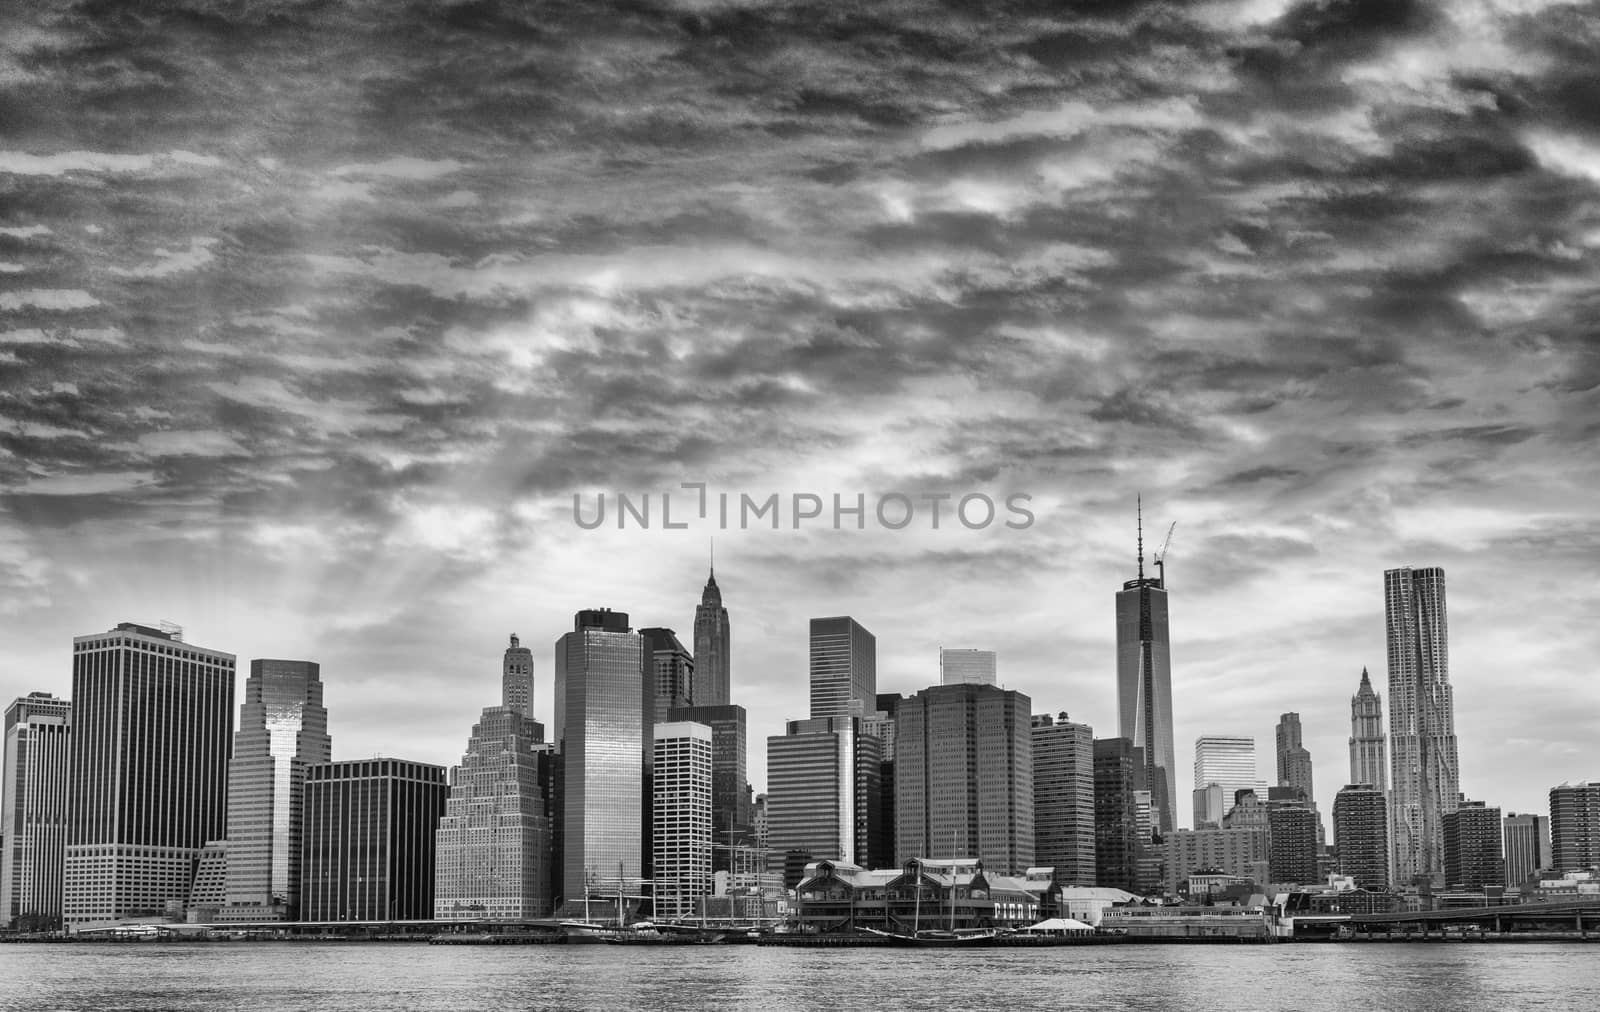 Black and white view of Lower Manhattan with dramatic sky by jovannig